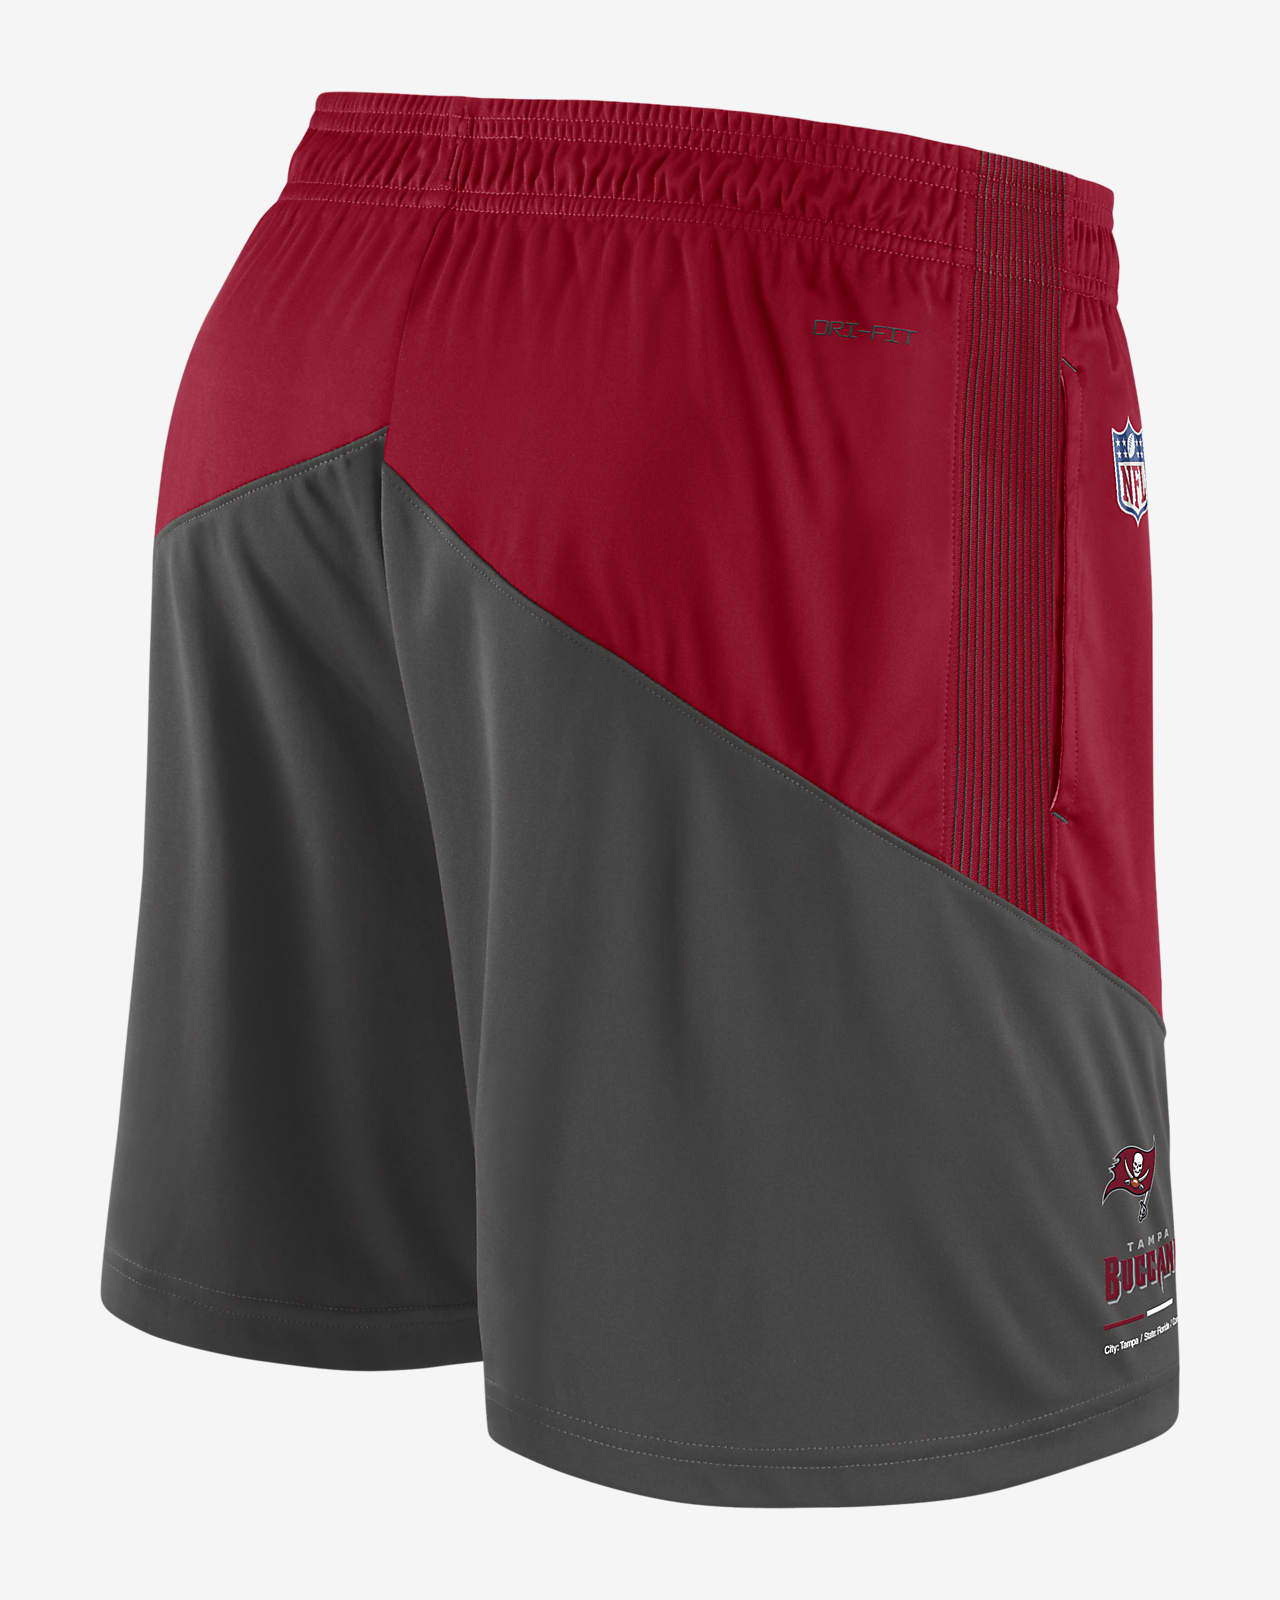 Shorts para hombre Nike Dri-FIT Primary (NFL Tampa Bay Buccaneers). Nike.com